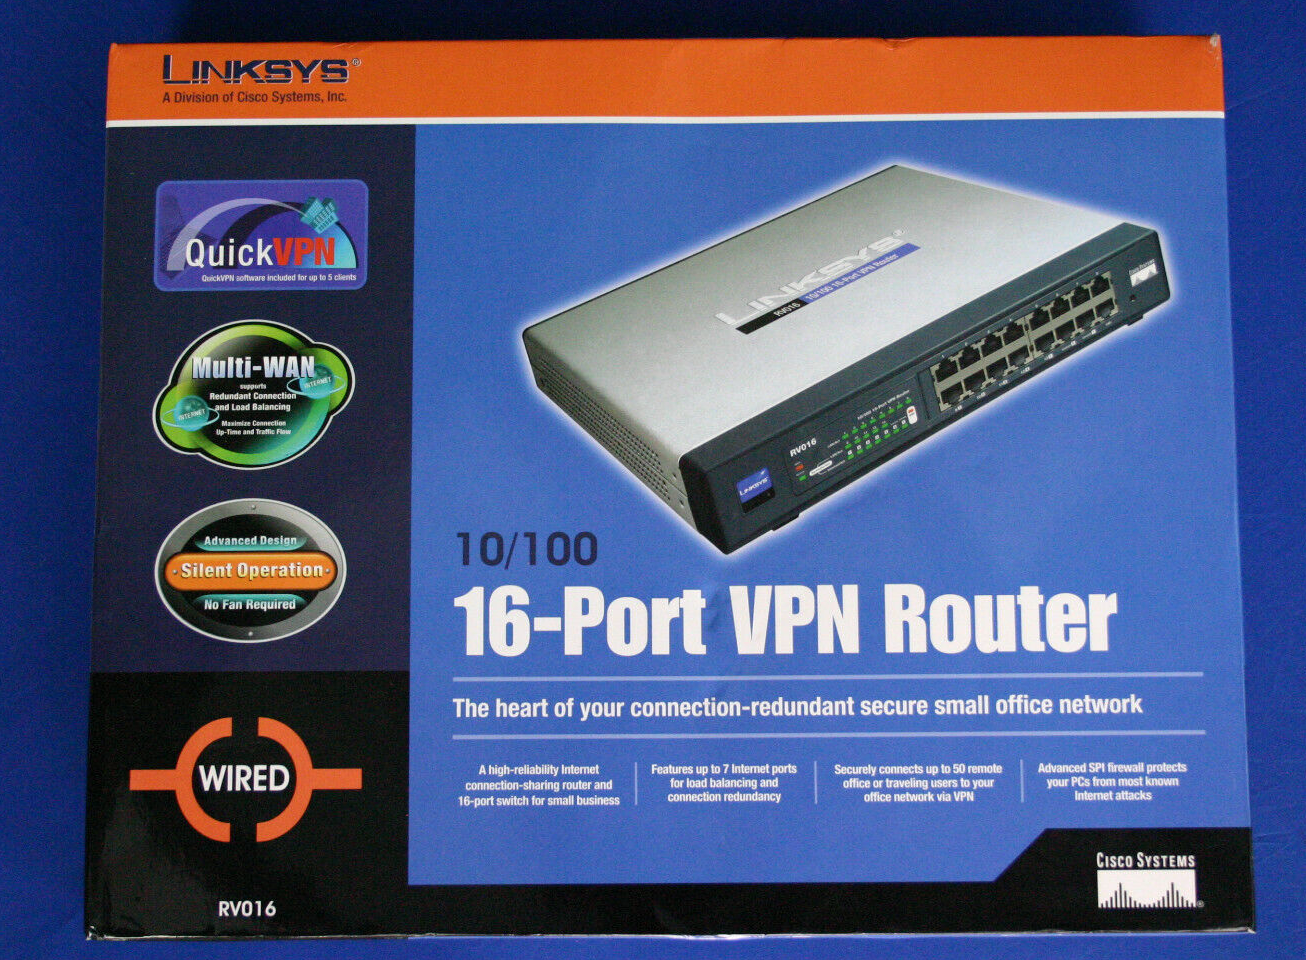 USED Linksys 10/100 16-Port VPN Router MFR #RV016 Mounted in 24" Wooden 12 Space Server Cabinet